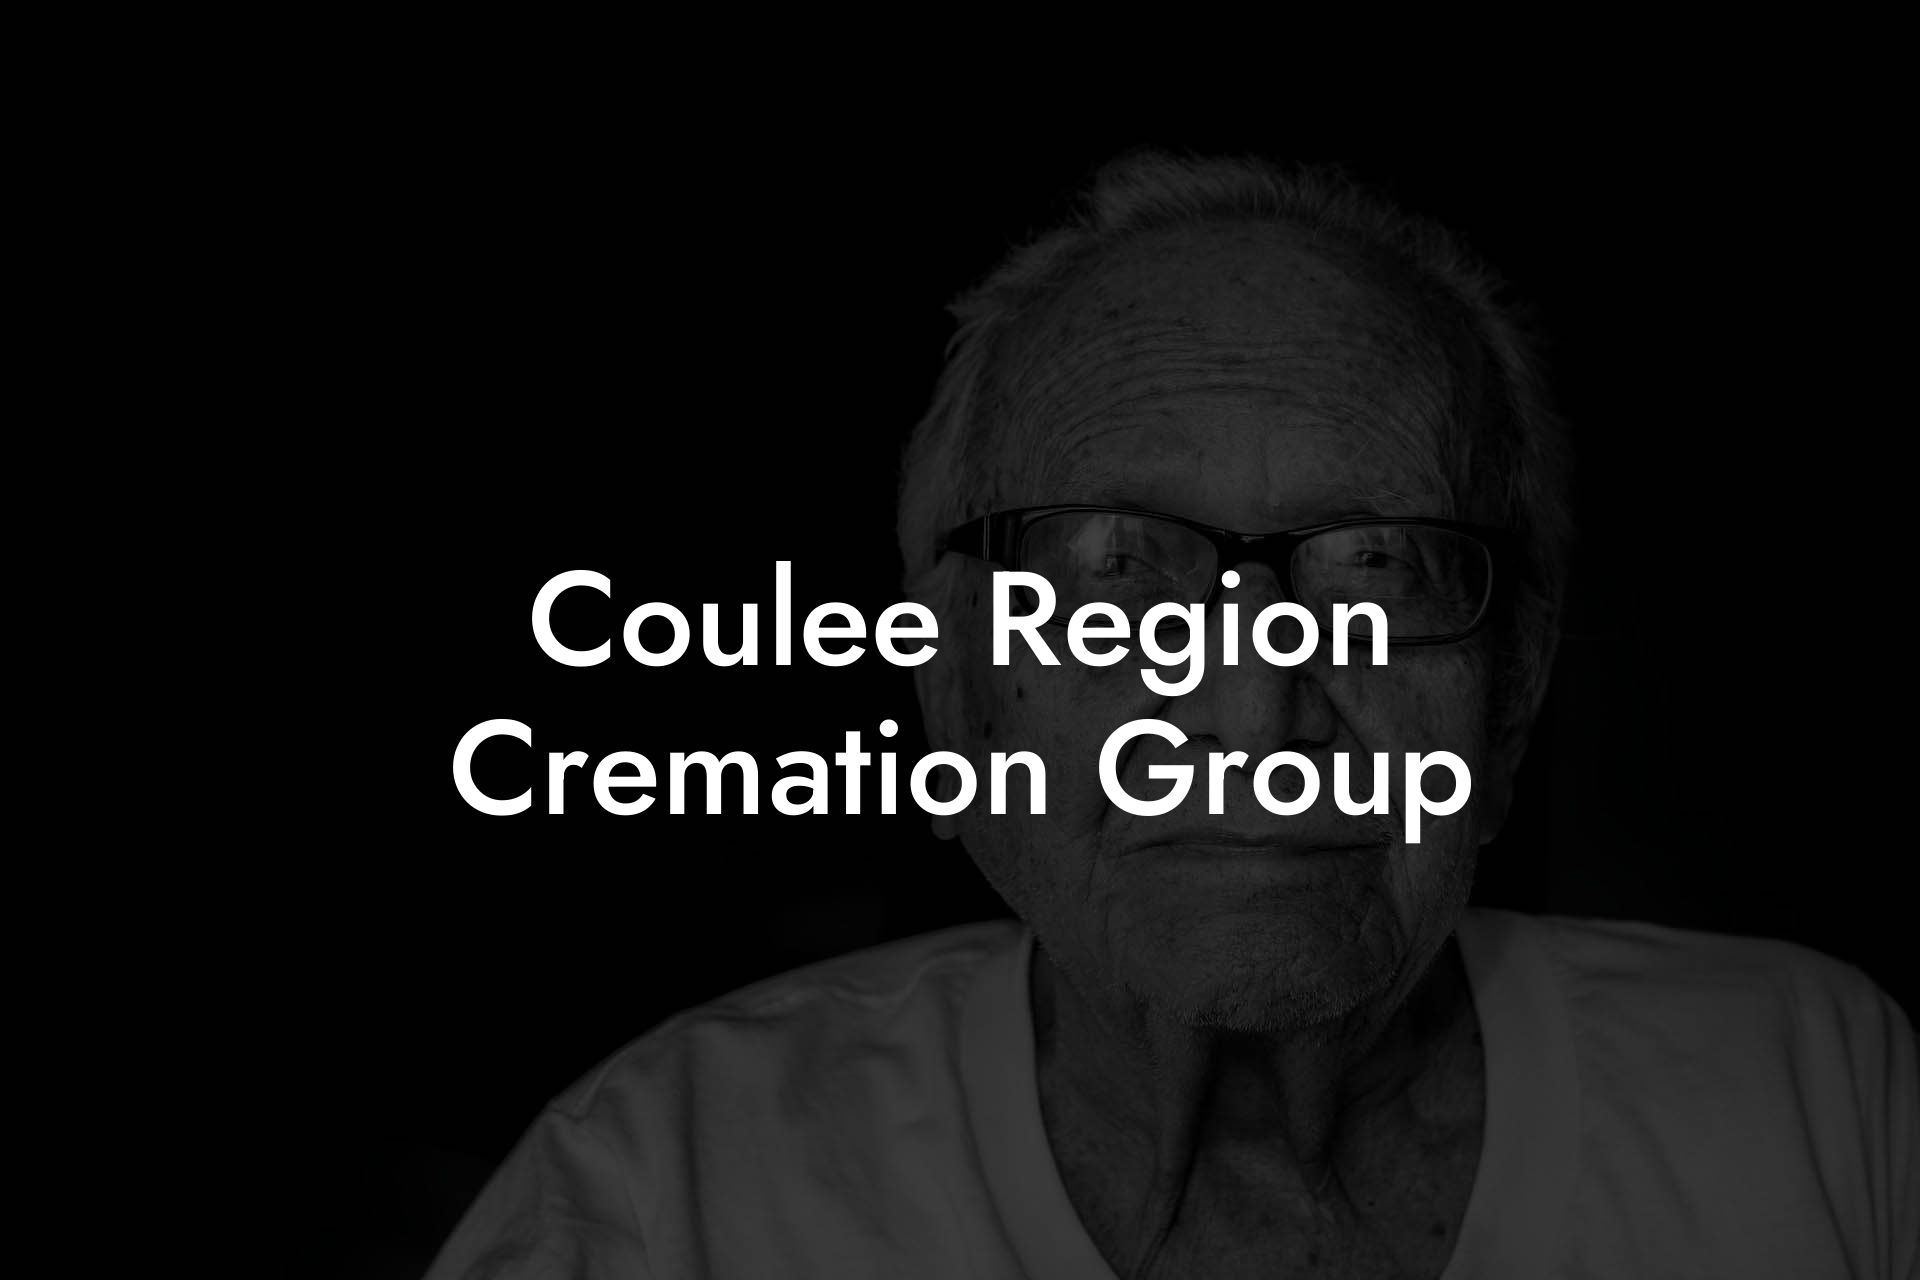 Coulee Region Cremation Group